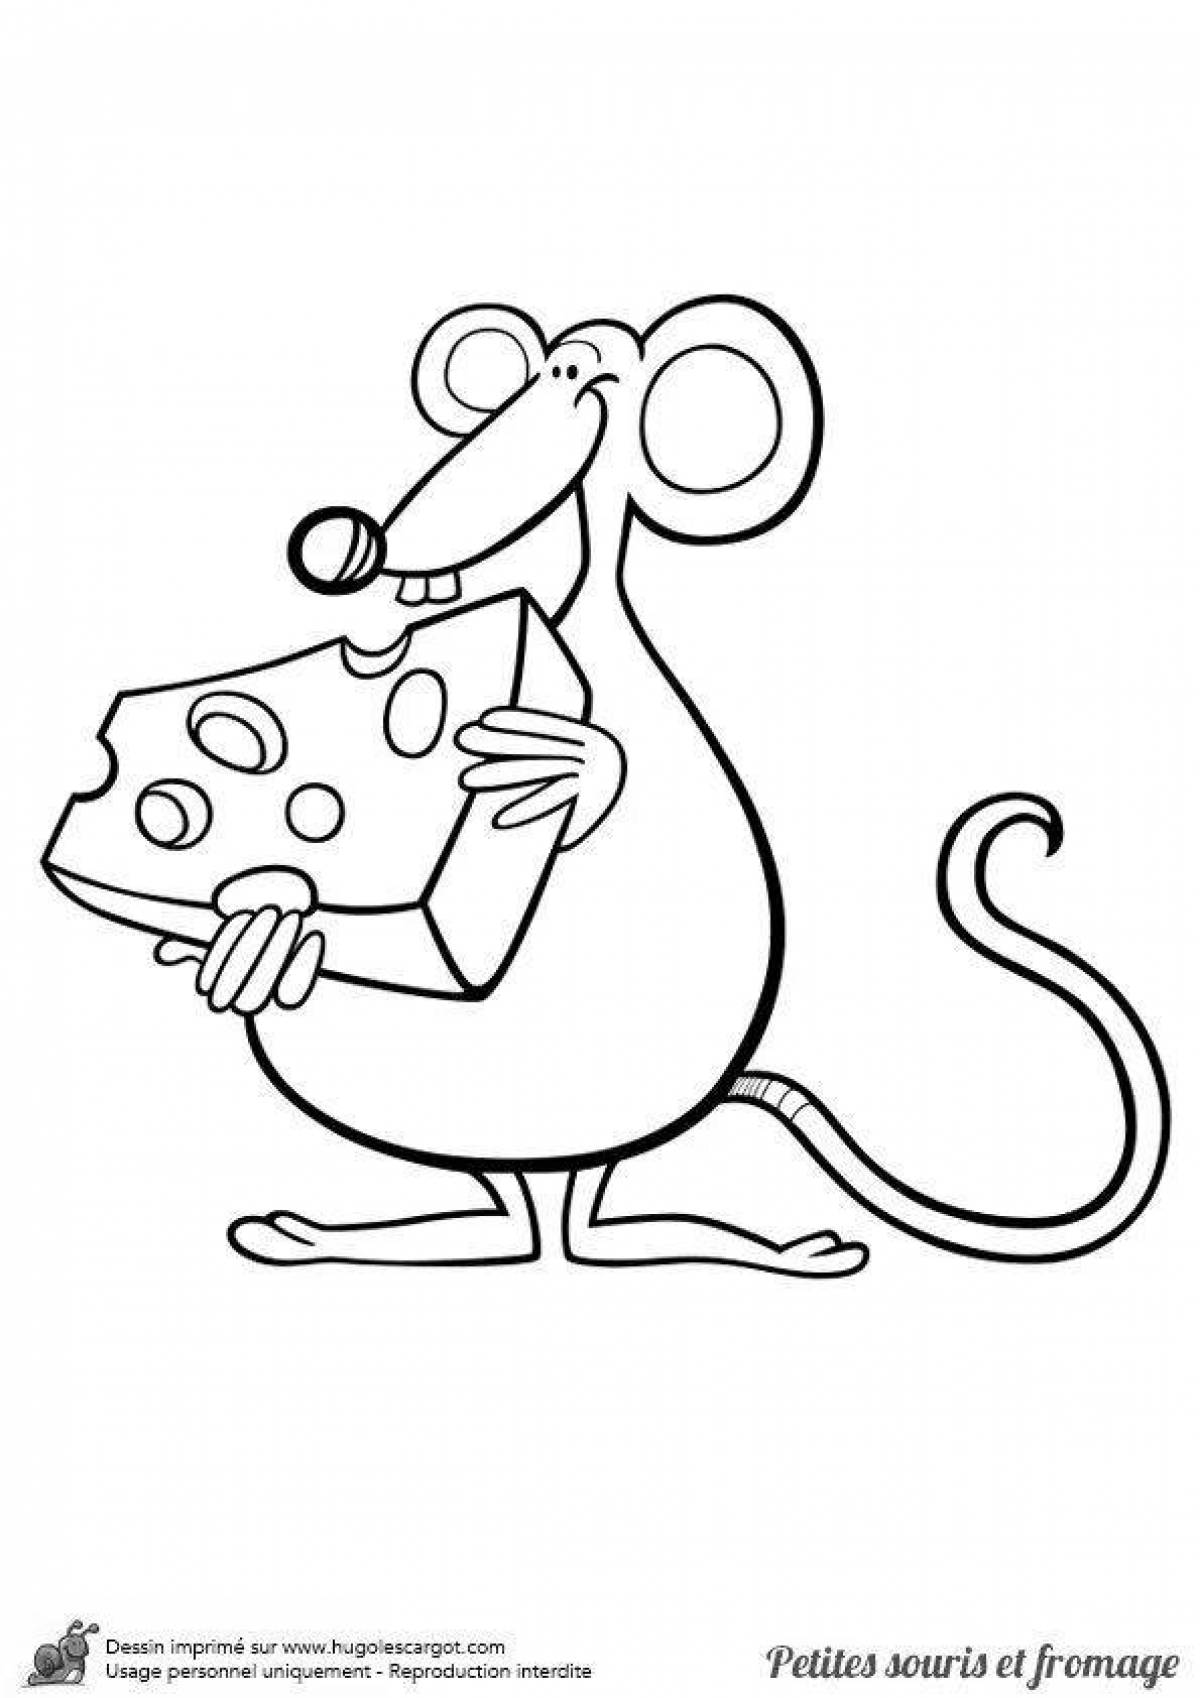 Mouse sausage coloring page